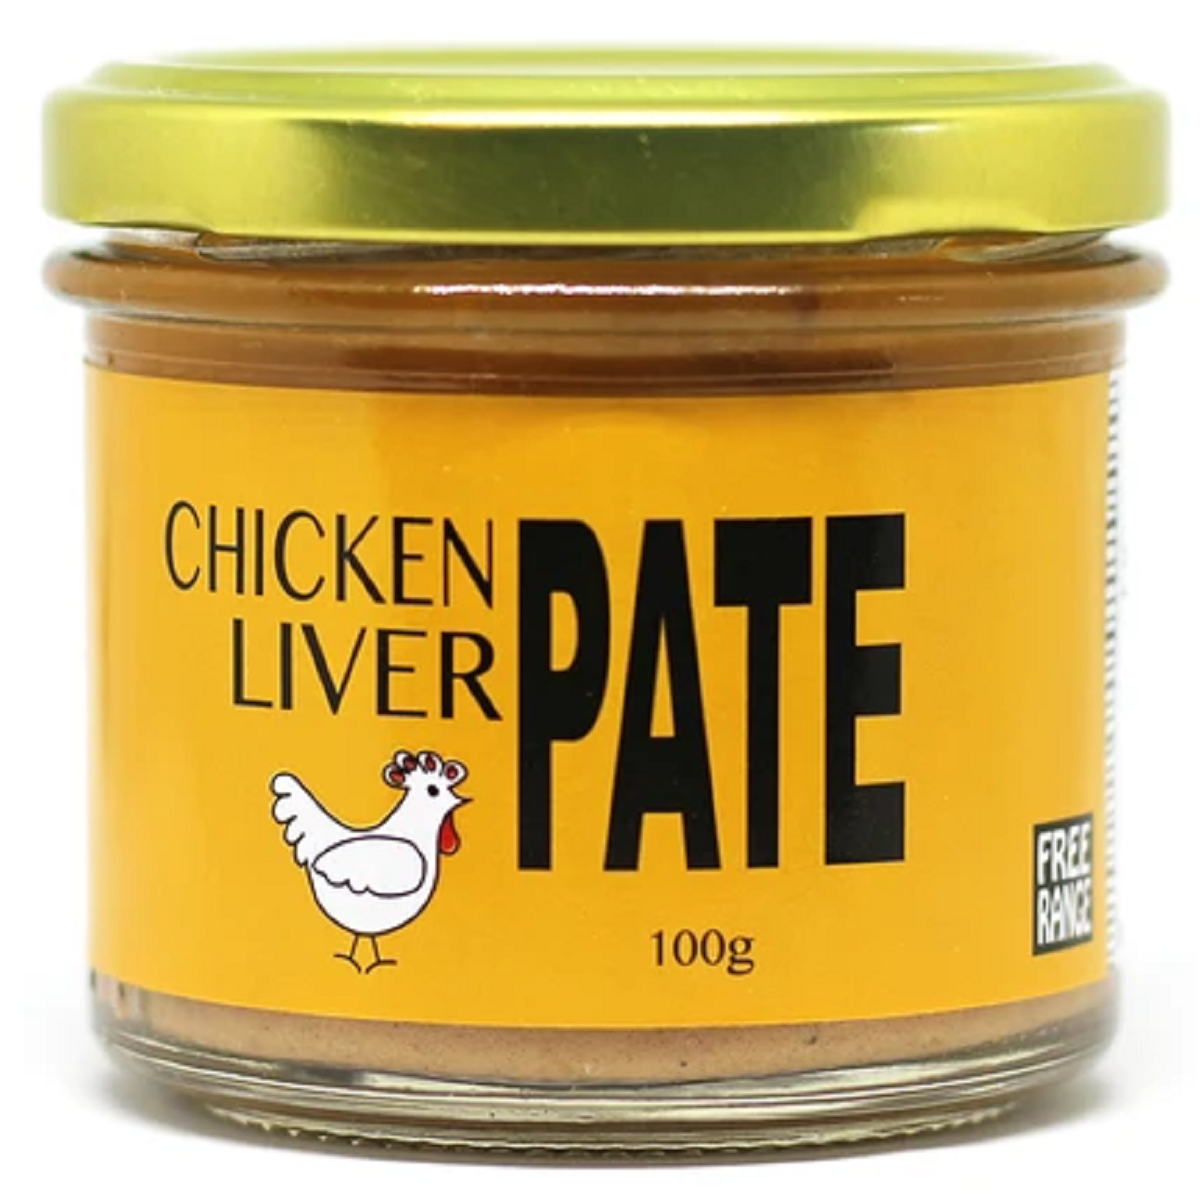 Le Paysan Chicken Liver Pate 100g